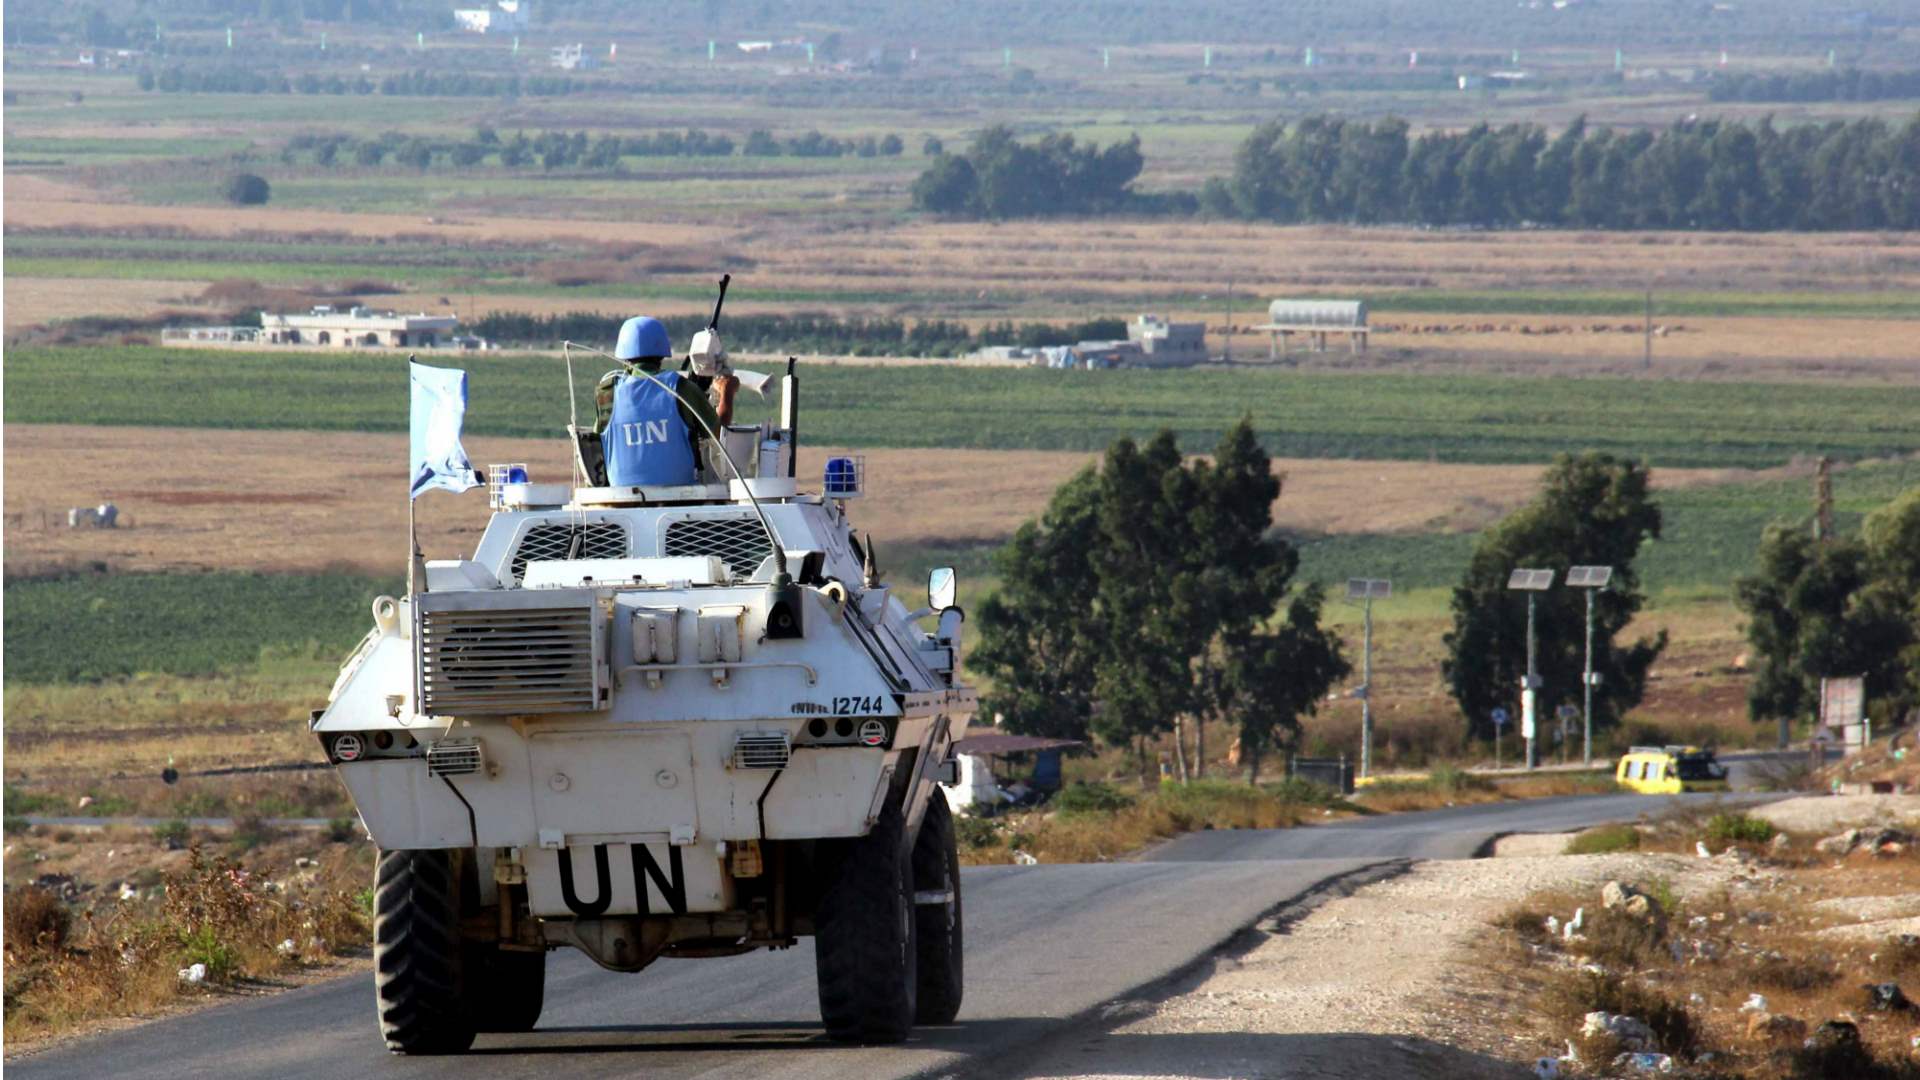 UNIFIL&#39;s warning: Exercise restraint to prevent further escalation on Lebanon-Israel border 